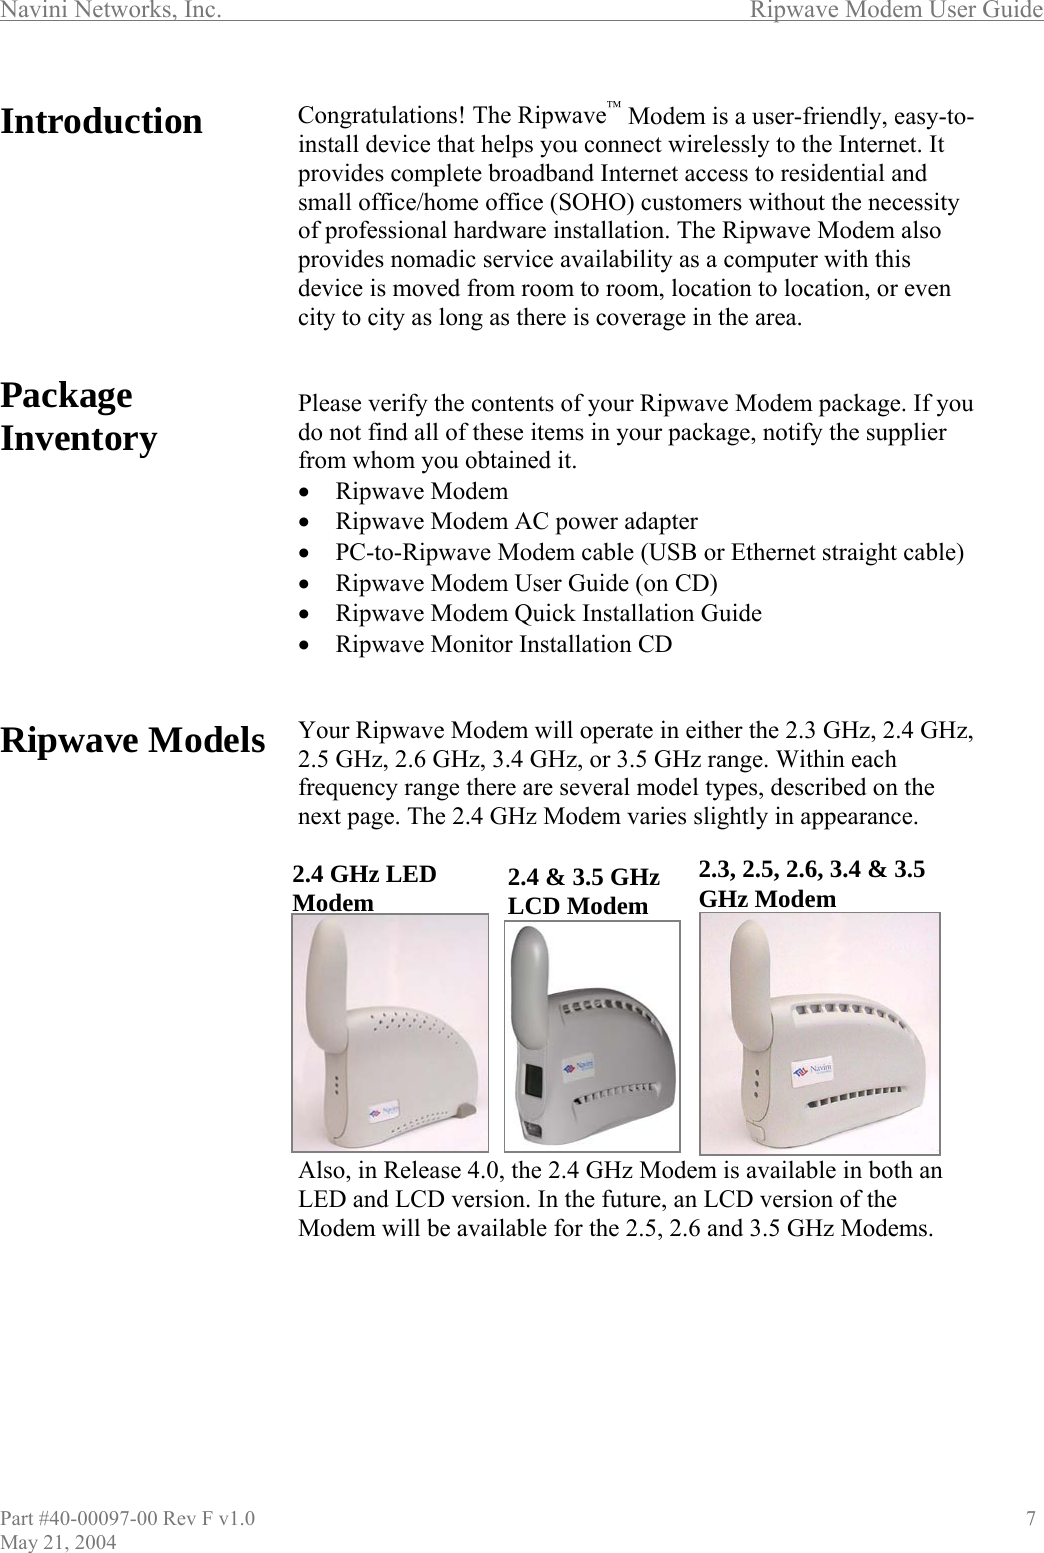 Navini Networks, Inc.        Ripwave Modem User Guide Introduction         Package Inventory          Ripwave Models              Congratulations! The Ripwave™ Modem is a user-friendly, easy-to-install device that helps you connect wirelessly to the Internet. It provides complete broadband Internet access to residential and small office/home office (SOHO) customers without the necessity of professional hardware installation. The Ripwave Modem also provides nomadic service availability as a computer with this device is moved from room to room, location to location, or even city to city as long as there is coverage in the area.   Please verify the contents of your Ripwave Modem package. If you do not find all of these items in your package, notify the supplier from whom you obtained it. •  Ripwave Modem •  Ripwave Modem AC power adapter •  PC-to-Ripwave Modem cable (USB or Ethernet straight cable) •  Ripwave Modem User Guide (on CD) •  Ripwave Modem Quick Installation Guide •  Ripwave Monitor Installation CD   Your Ripwave Modem will operate in either the 2.3 GHz, 2.4 GHz, 2.5 GHz, 2.6 GHz, 3.4 GHz, or 3.5 GHz range. Within each frequency range there are several model types, described on the next page. The 2.4 GHz Modem varies slightly in appearance. Also, in Release 4.0, the 2.4 GHz Modem is available in both an LED and LCD version. In the future, an LCD version of the Modem will be available for the 2.5, 2.6 and 3.5 GHz Modems.        2.4 GHz LED Modem2.3, 2.5, 2.6, 3.4 &amp; 3.5 GHz Modem 2.4 &amp; 3.5 GHz LCD ModemPart #40-00097-00 Rev F v1.0                                          7 May 21, 2004 